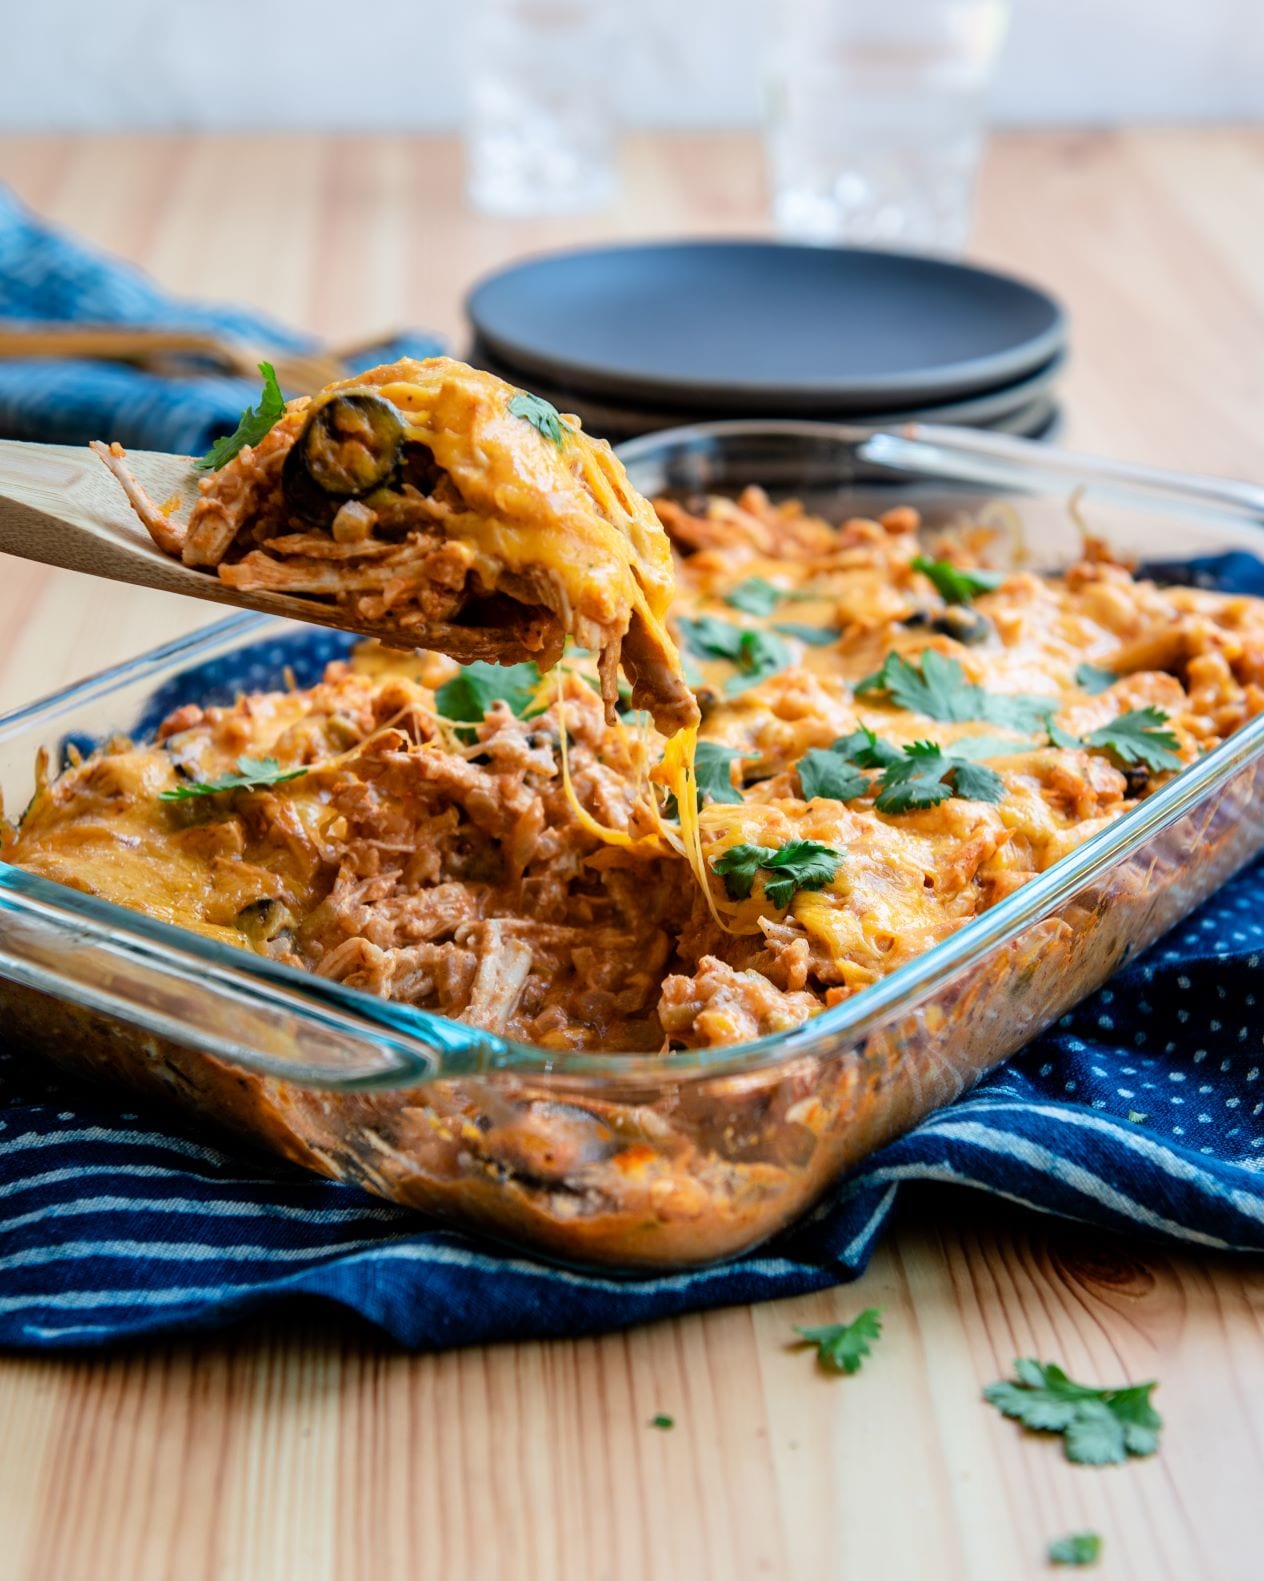 Have a hearty dinner on the table in just about 30 minutes with this easy chicken enchilada casserole recipe!